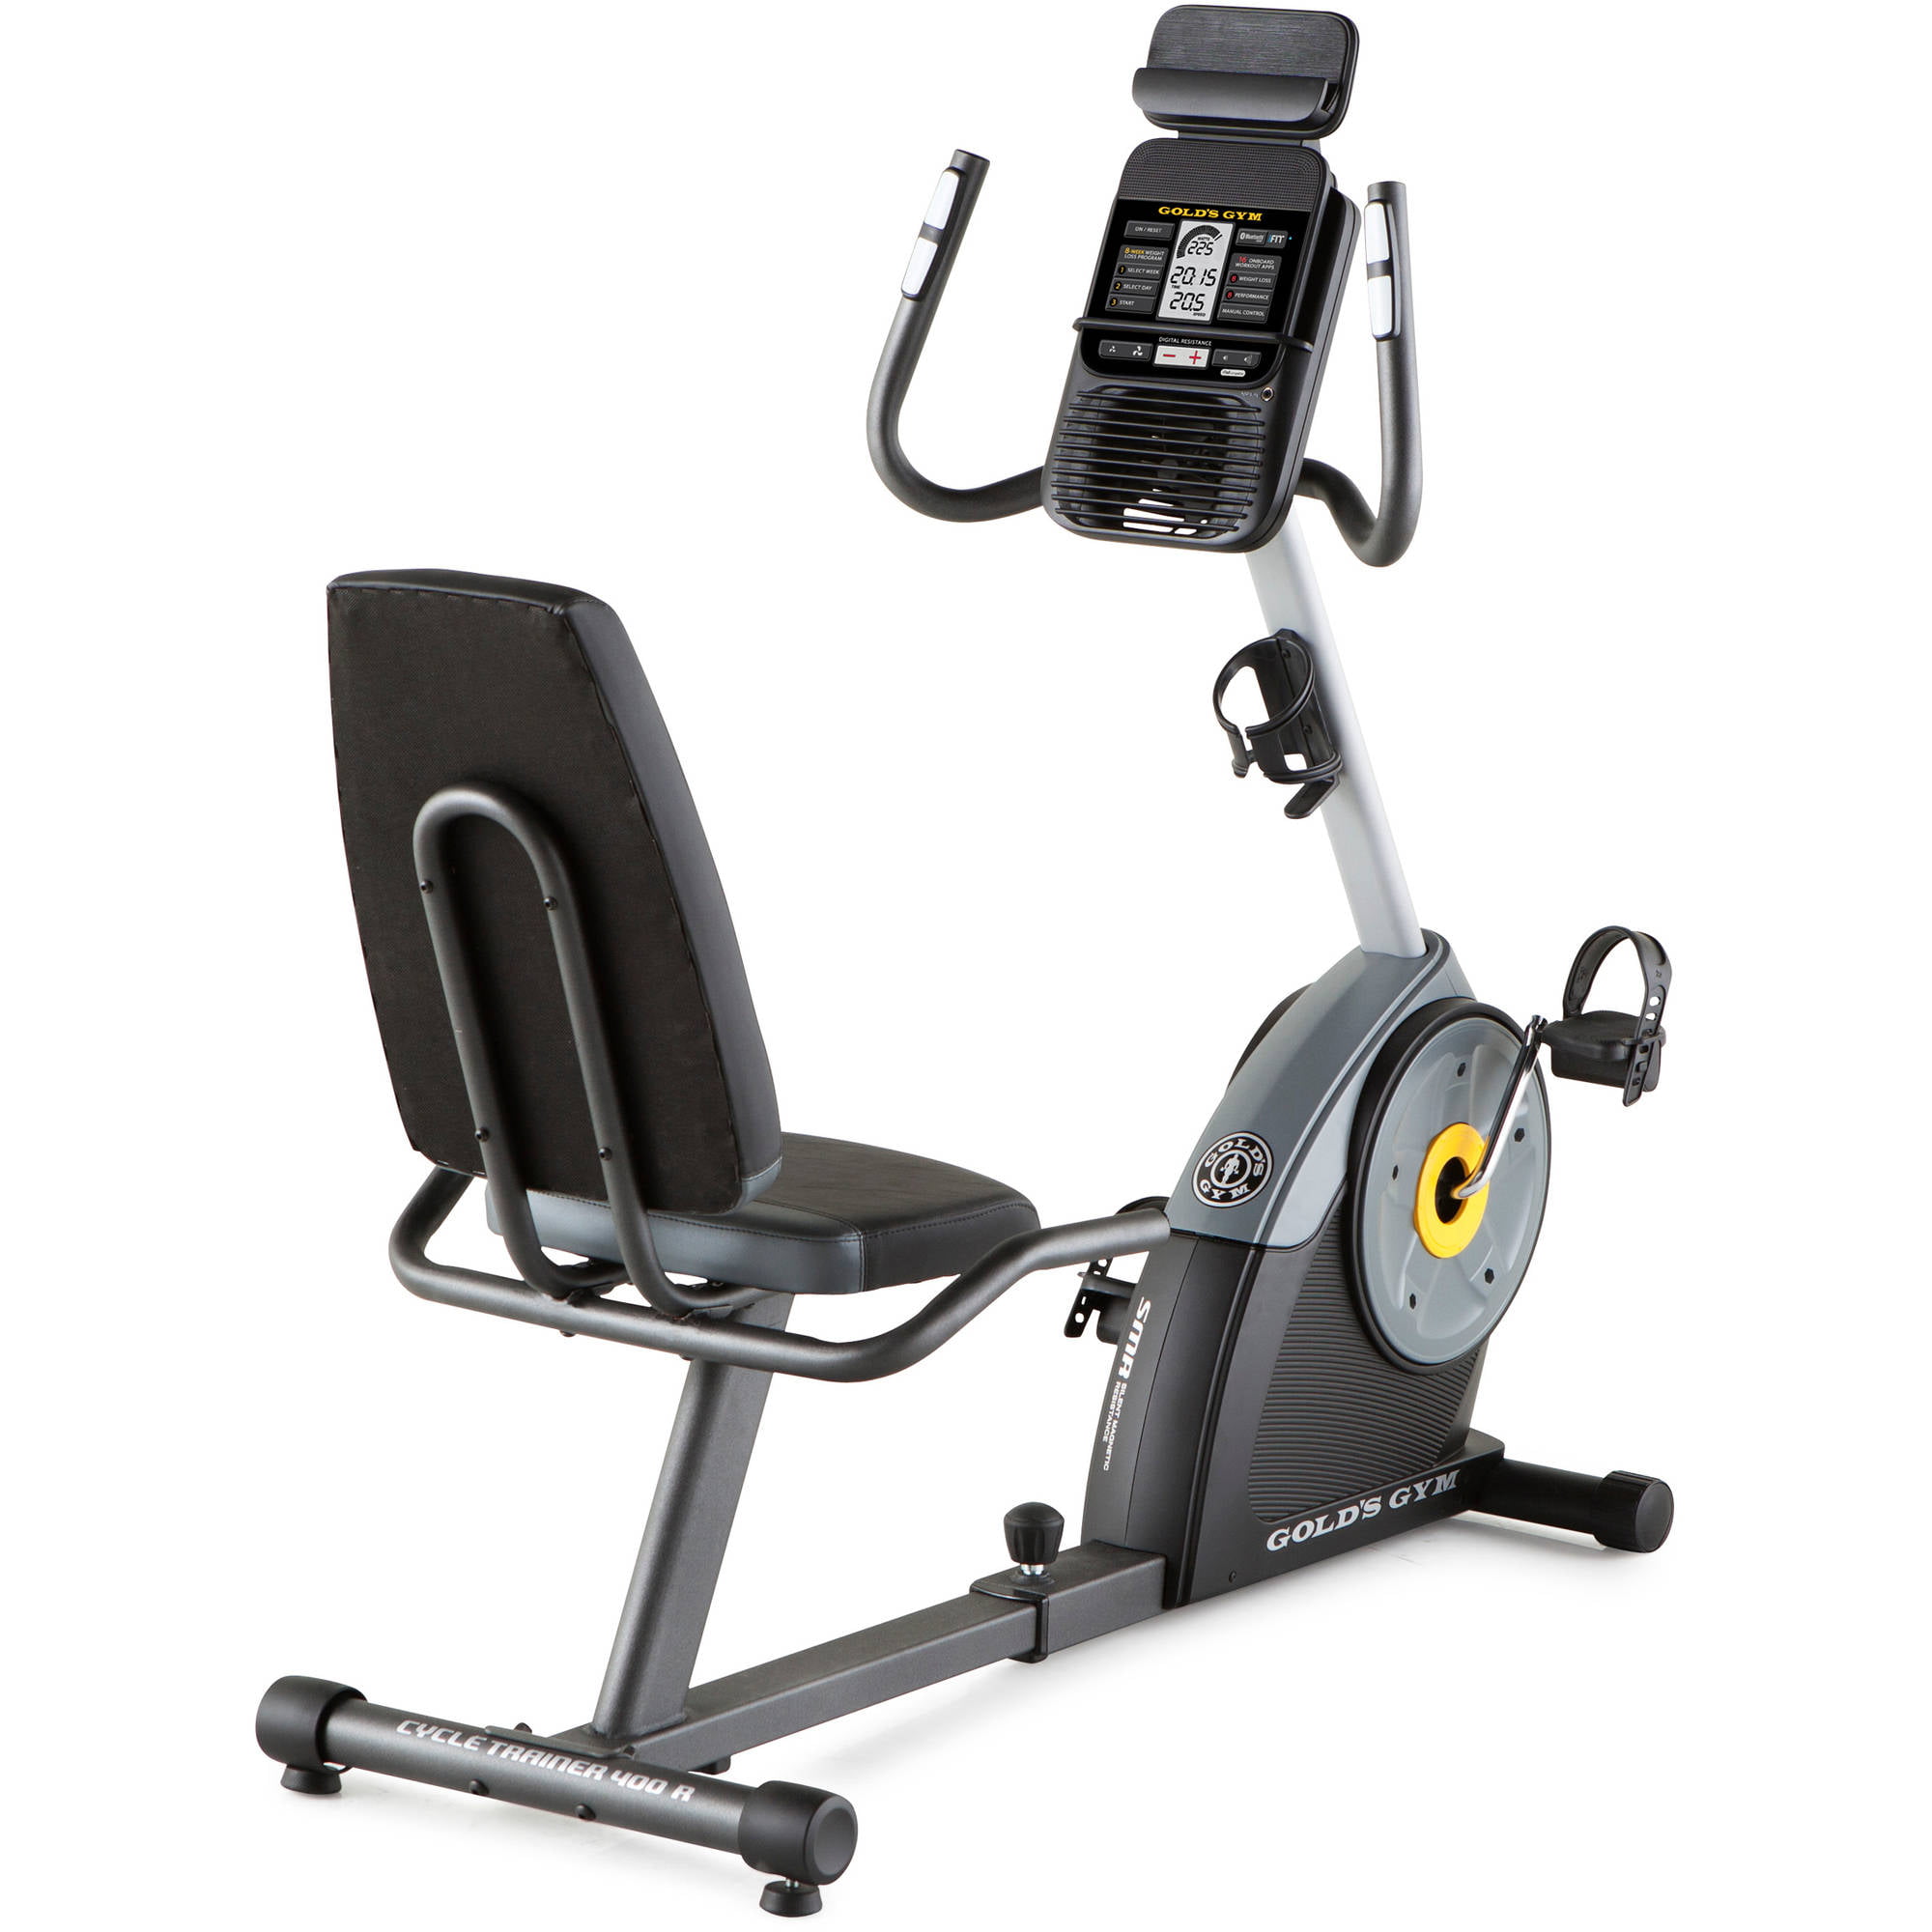 Golds Gym Cycle Trainer 400 Ri Recumbent Exercise Bike Walmart within cycling exercise equipment benefits with regard to Residence